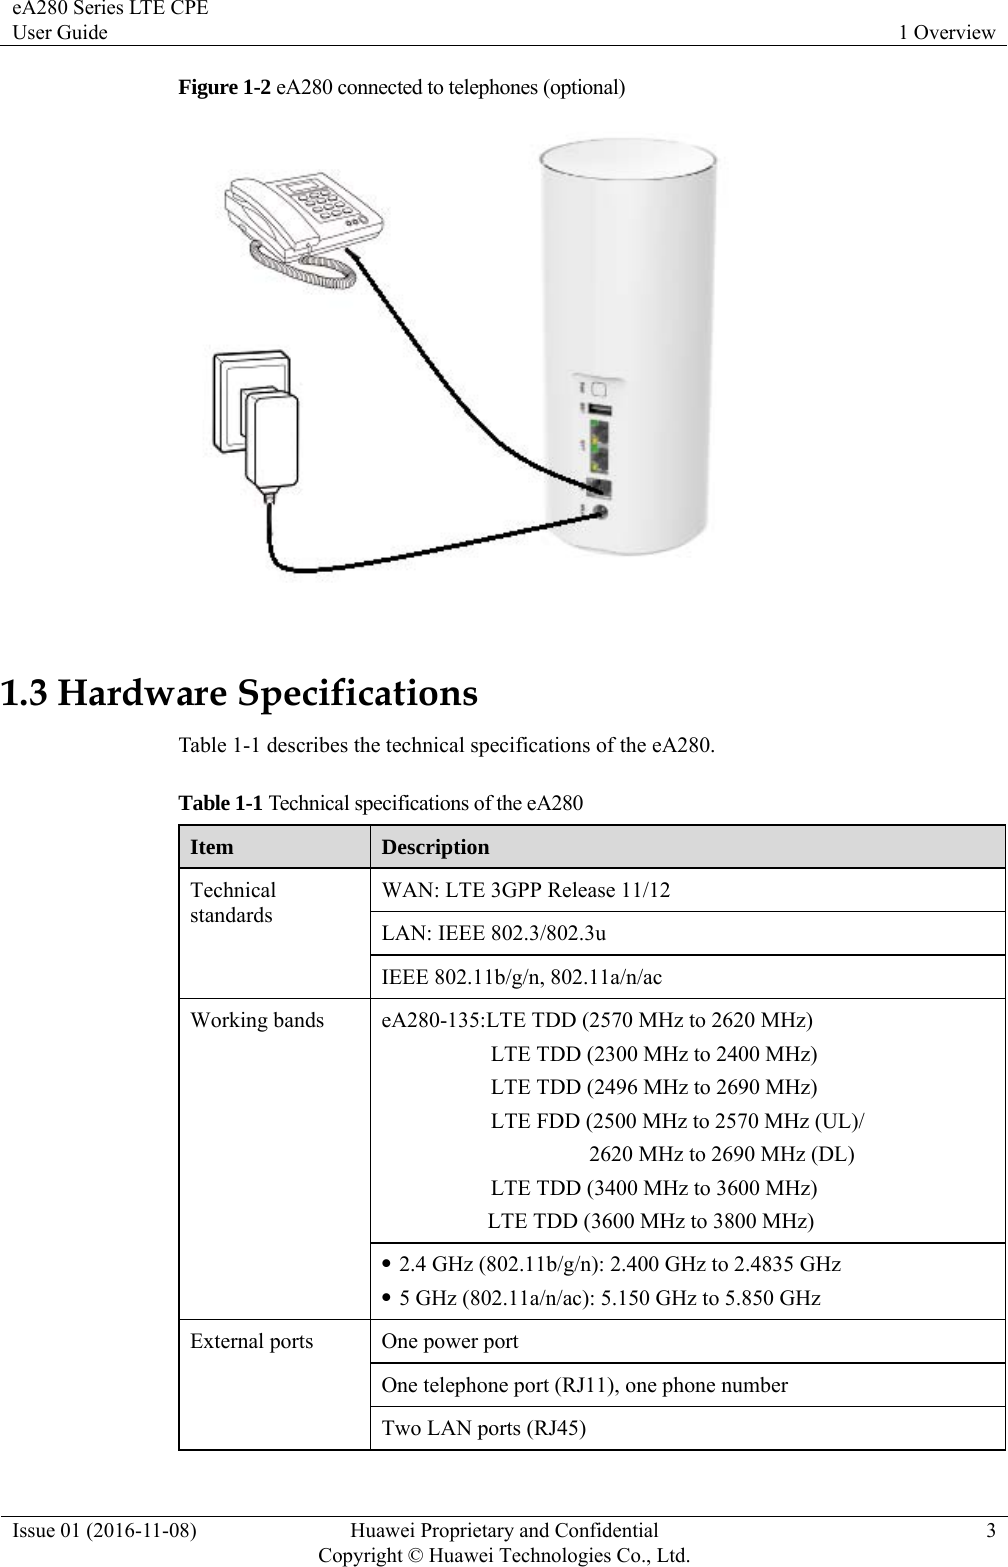 eA280 Series LTE CPE User Guide  1 Overview Issue 01 (2016-11-08)  Huawei Proprietary and Confidential         Copyright © Huawei Technologies Co., Ltd.3 Figure 1-2 eA280 connected to telephones (optional)  1.3 Hardware Specifications Table 1-1 describes the technical specifications of the eA280. Table 1-1 Technical specifications of the eA280 Item  Description Technical standards WAN: LTE 3GPP Release 11/12 LAN: IEEE 802.3/802.3u IEEE 802.11b/g/n, 802.11a/n/ac Working bands  eA280-135:LTE TDD (2570 MHz to 2620 MHz) LTE TDD (2300 MHz to 2400 MHz) LTE TDD (2496 MHz to 2690 MHz) LTE FDD (2500 MHz to 2570 MHz (UL)/ 2620 MHz to 2690 MHz (DL) LTE TDD (3400 MHz to 3600 MHz) LTE TDD (3600 MHz to 3800 MHz)  2.4 GHz (802.11b/g/n): 2.400 GHz to 2.4835 GHz  5 GHz (802.11a/n/ac): 5.150 GHz to 5.850 GHz External ports  One power port One telephone port (RJ11), one phone number Two LAN ports (RJ45) 